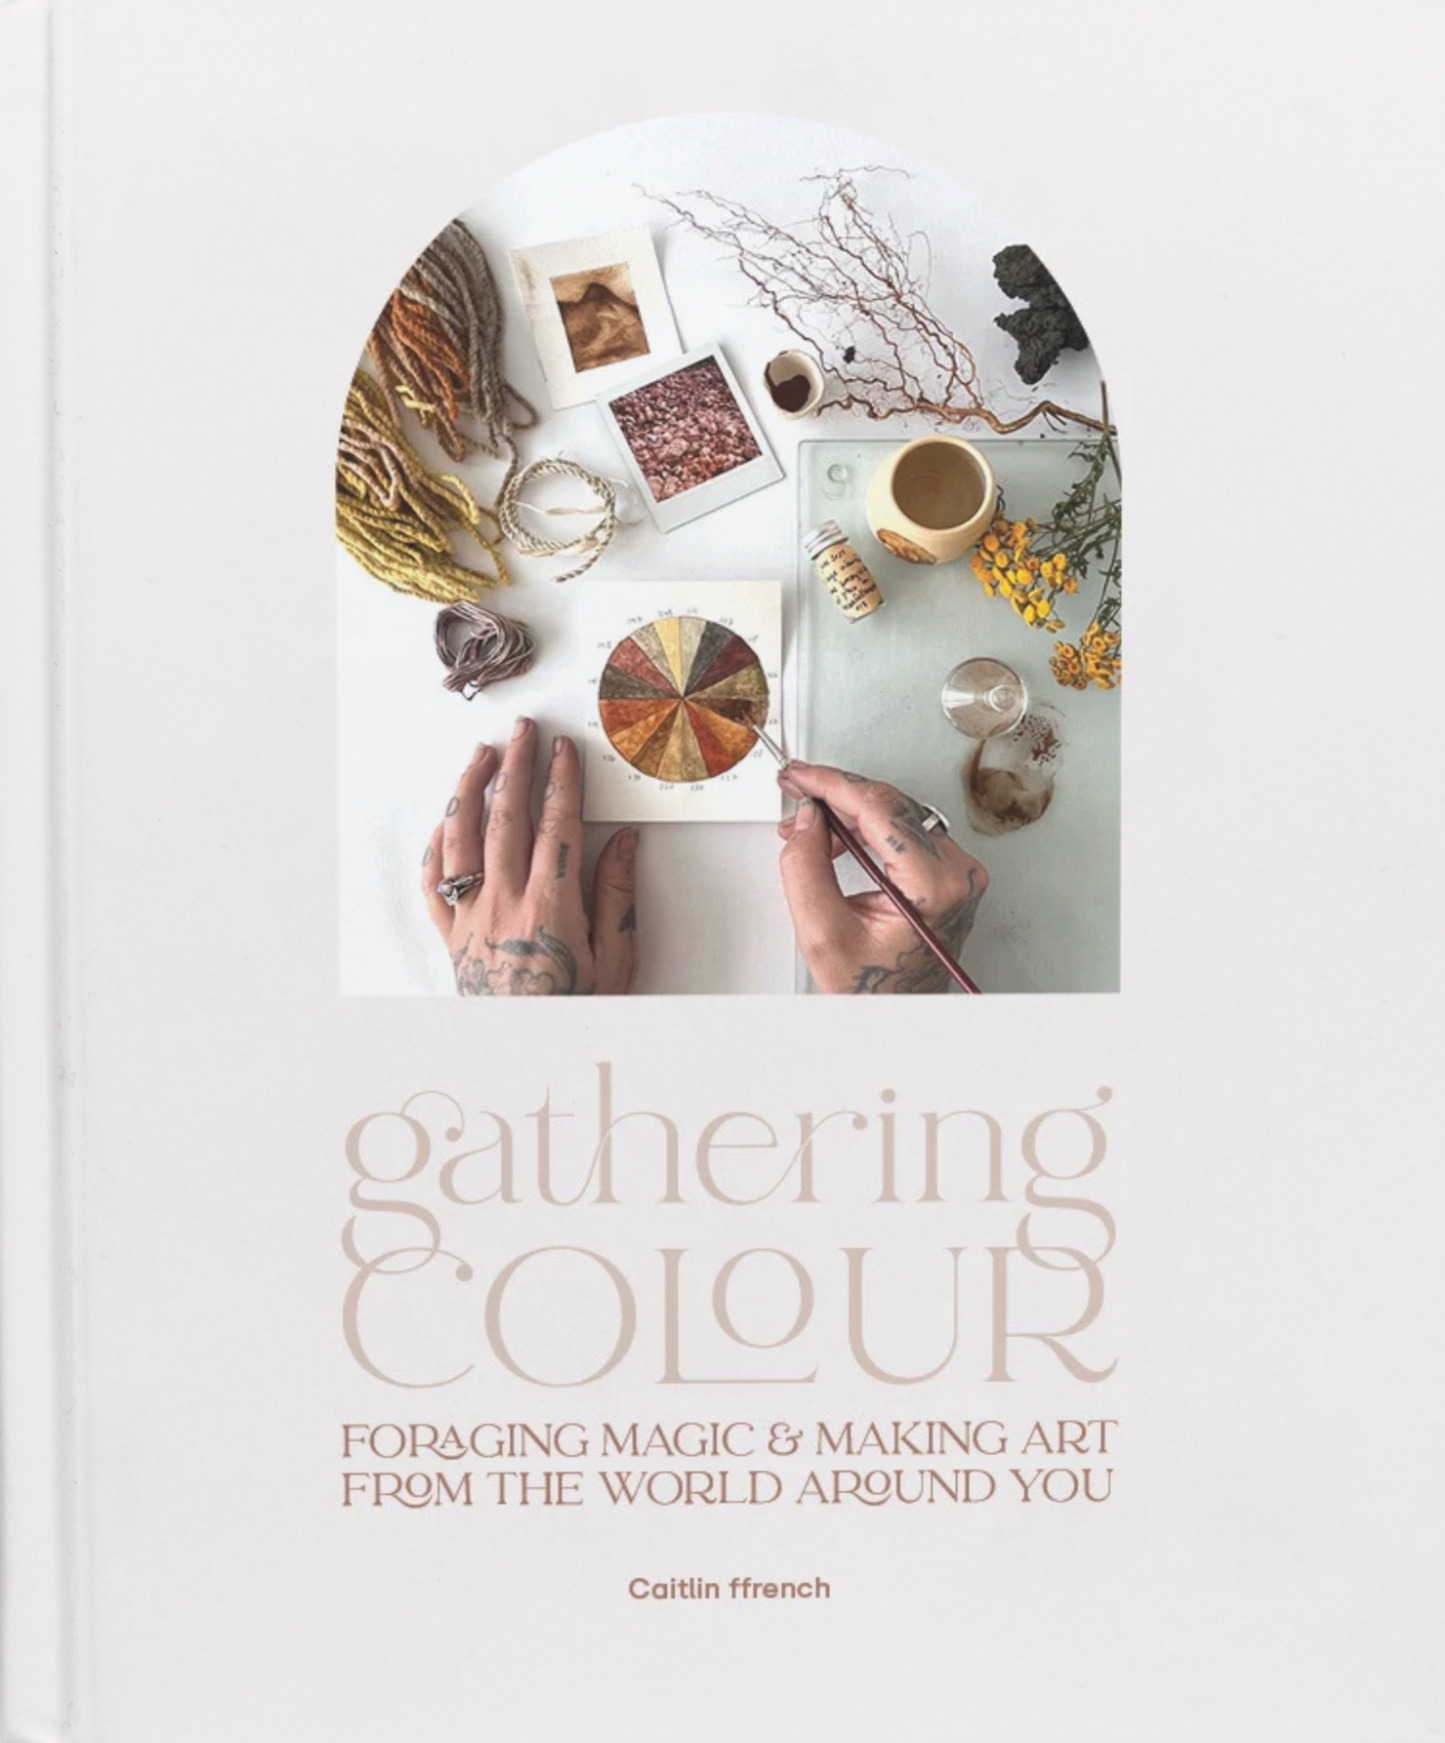 EARLYBIRD PRE-ORDER: Gathering Colour, by Caitlin ffrench